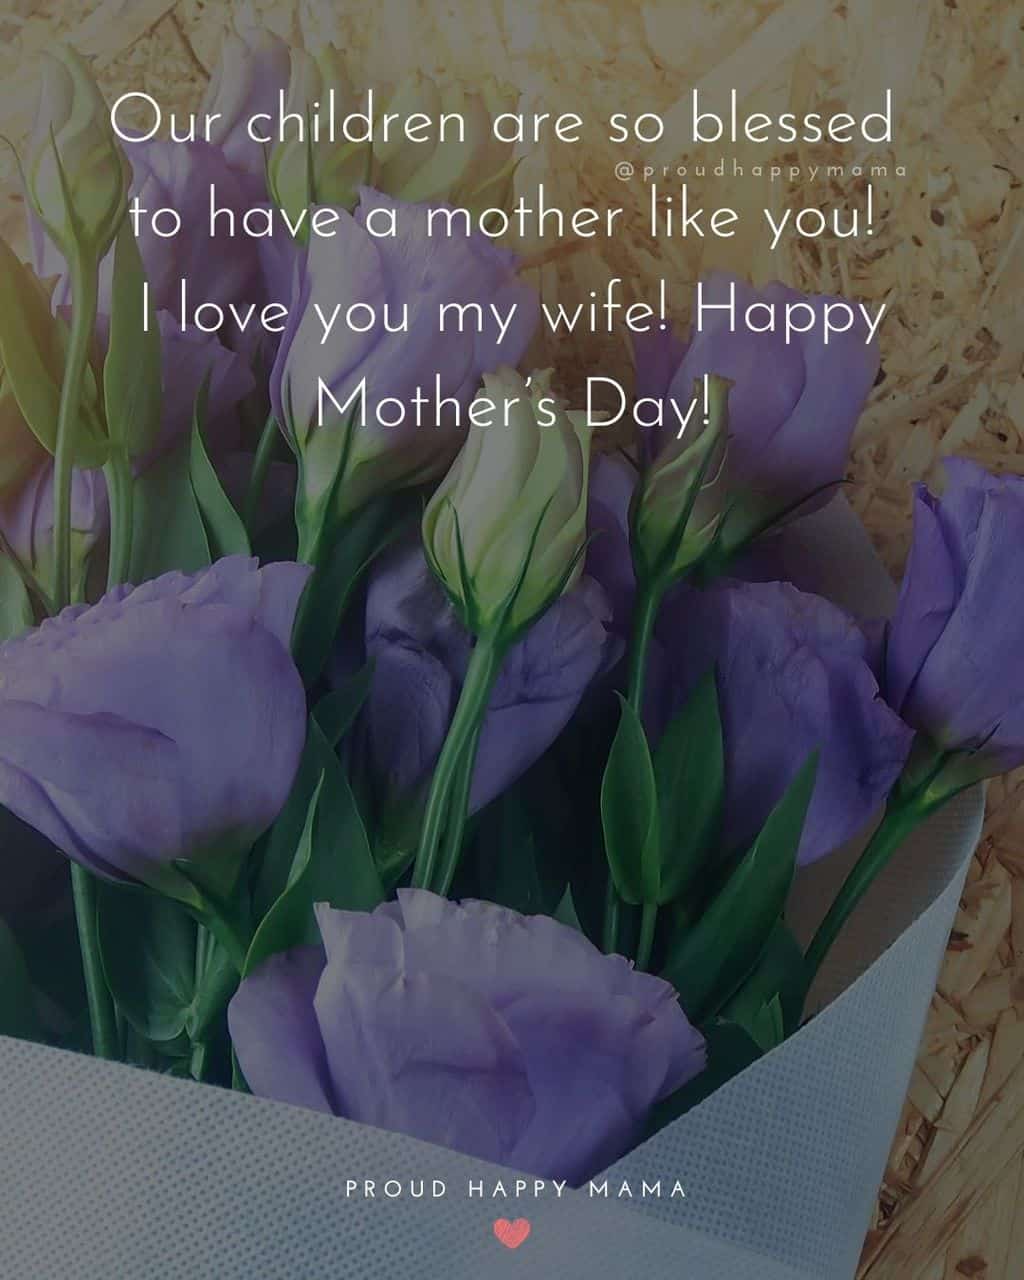 Happy Mothers Day Quotes For Wife - Our children are so blessed to have a mother like you! I love you my wife! Happy